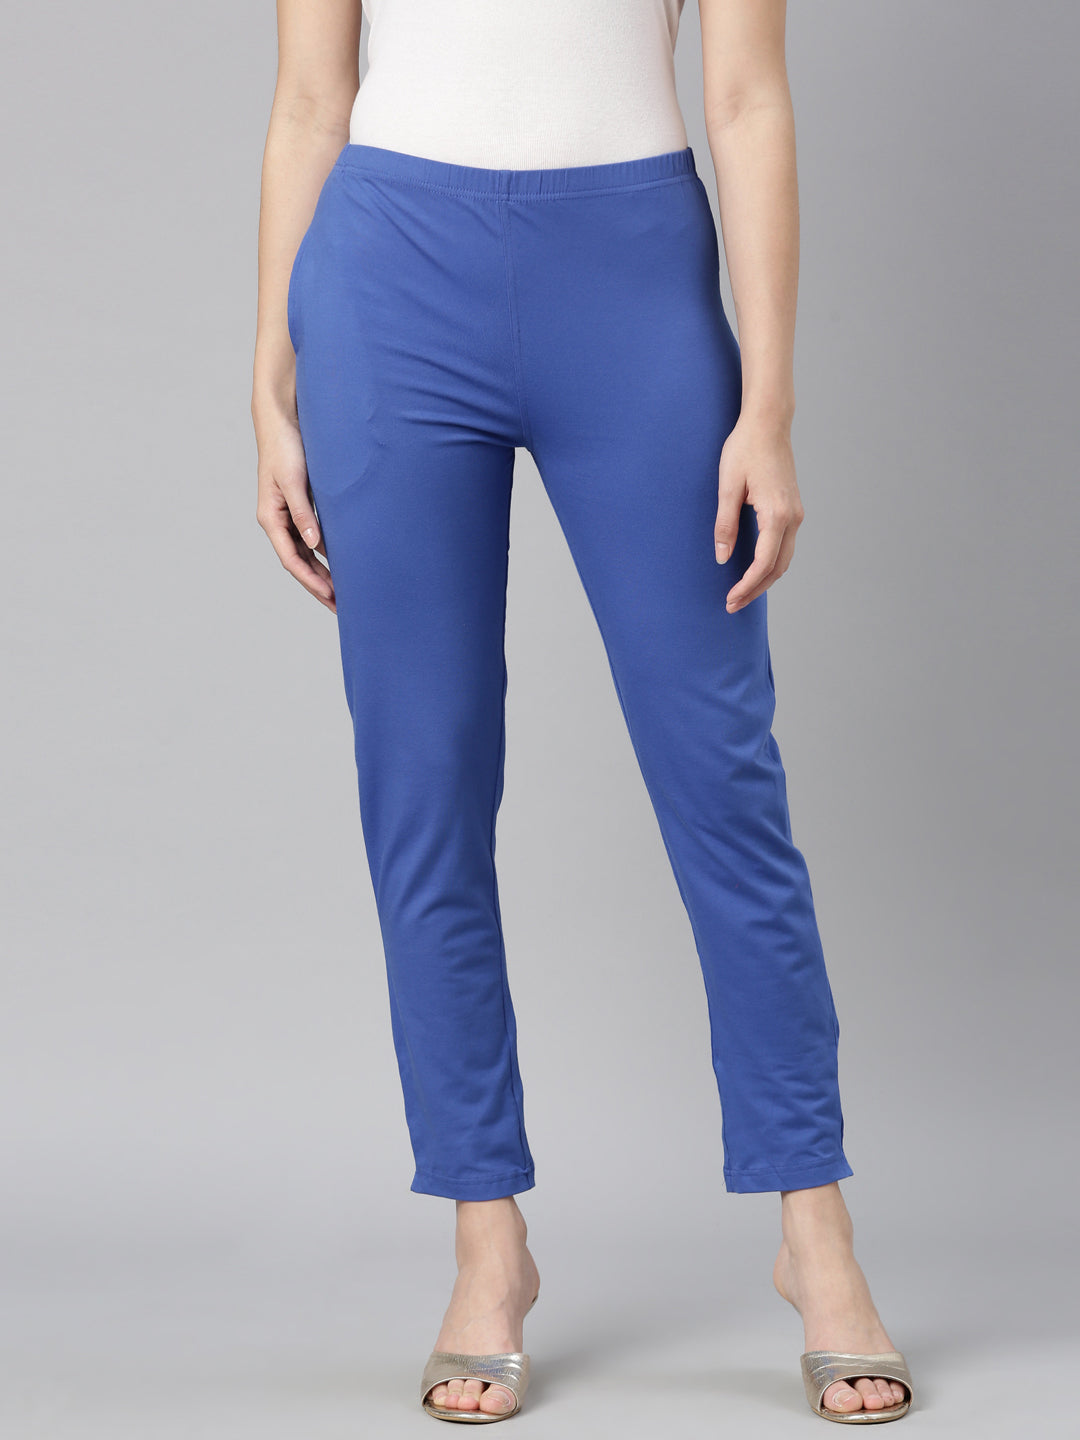 Buy Off White Pants for Women by Melange by Lifestyle Online | Ajio.com